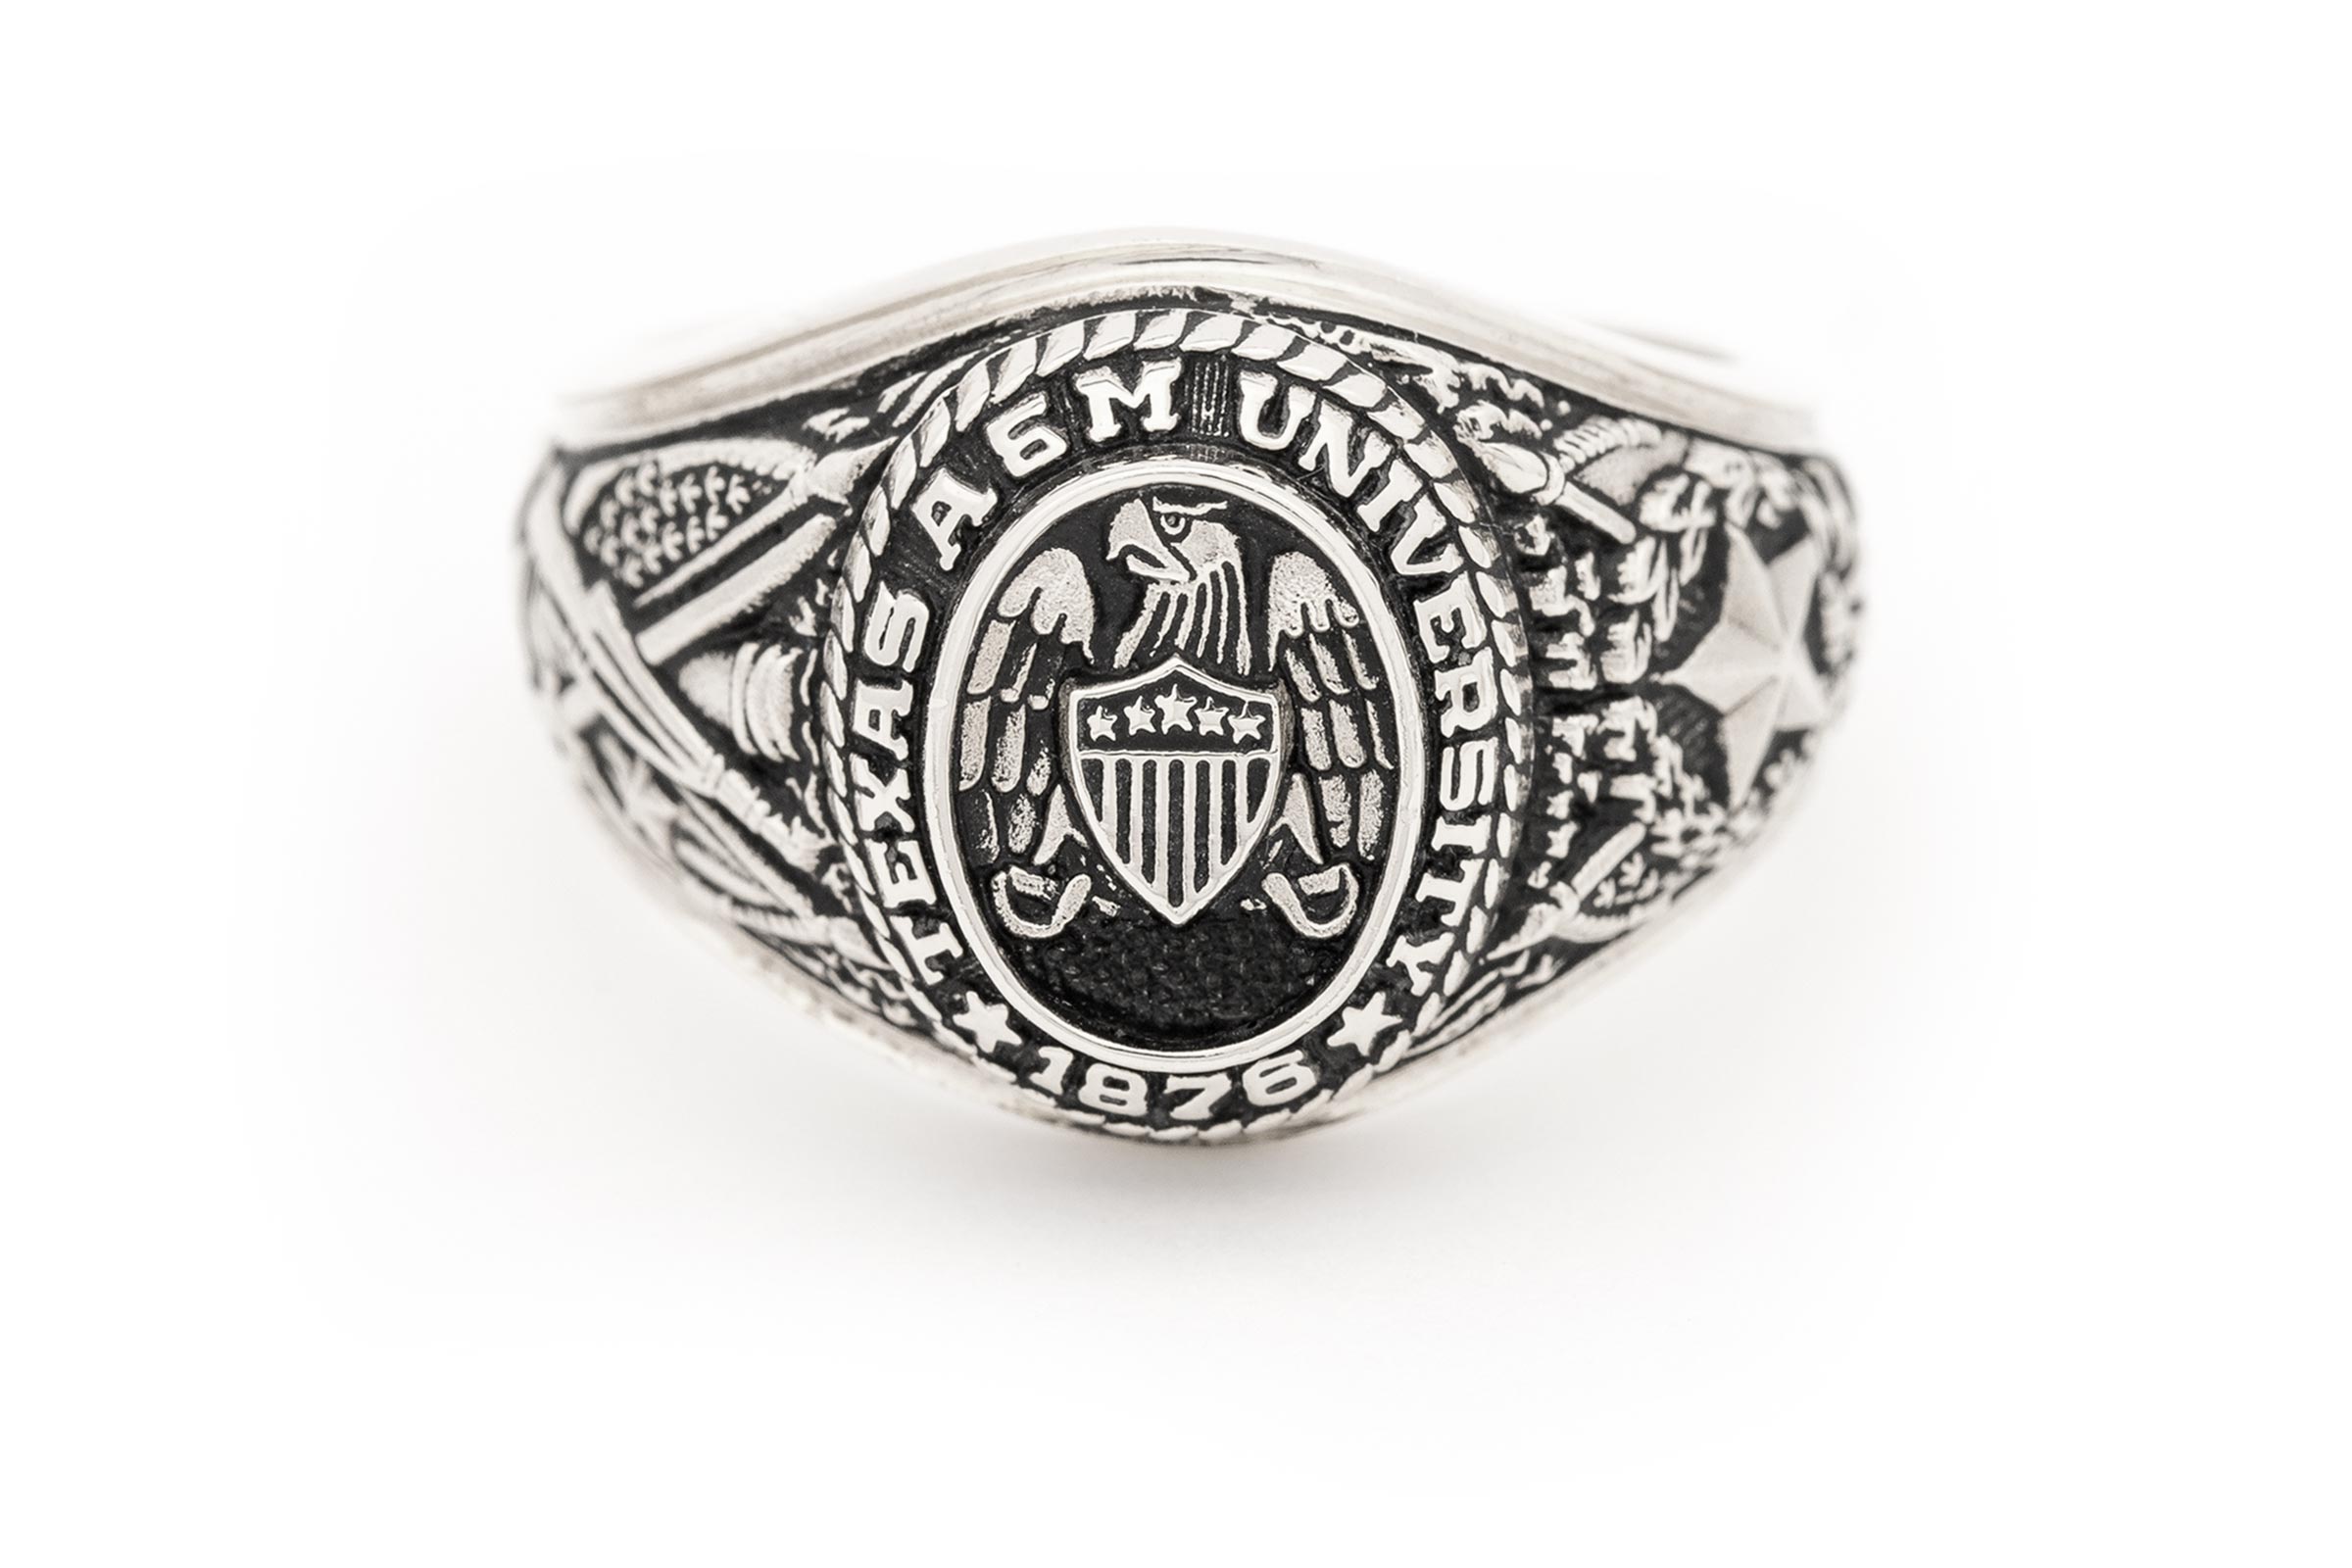 Full Logo College Jewelry Texas A&M University Aggies Rings Stainless Steel 6MM Wide Ring Band